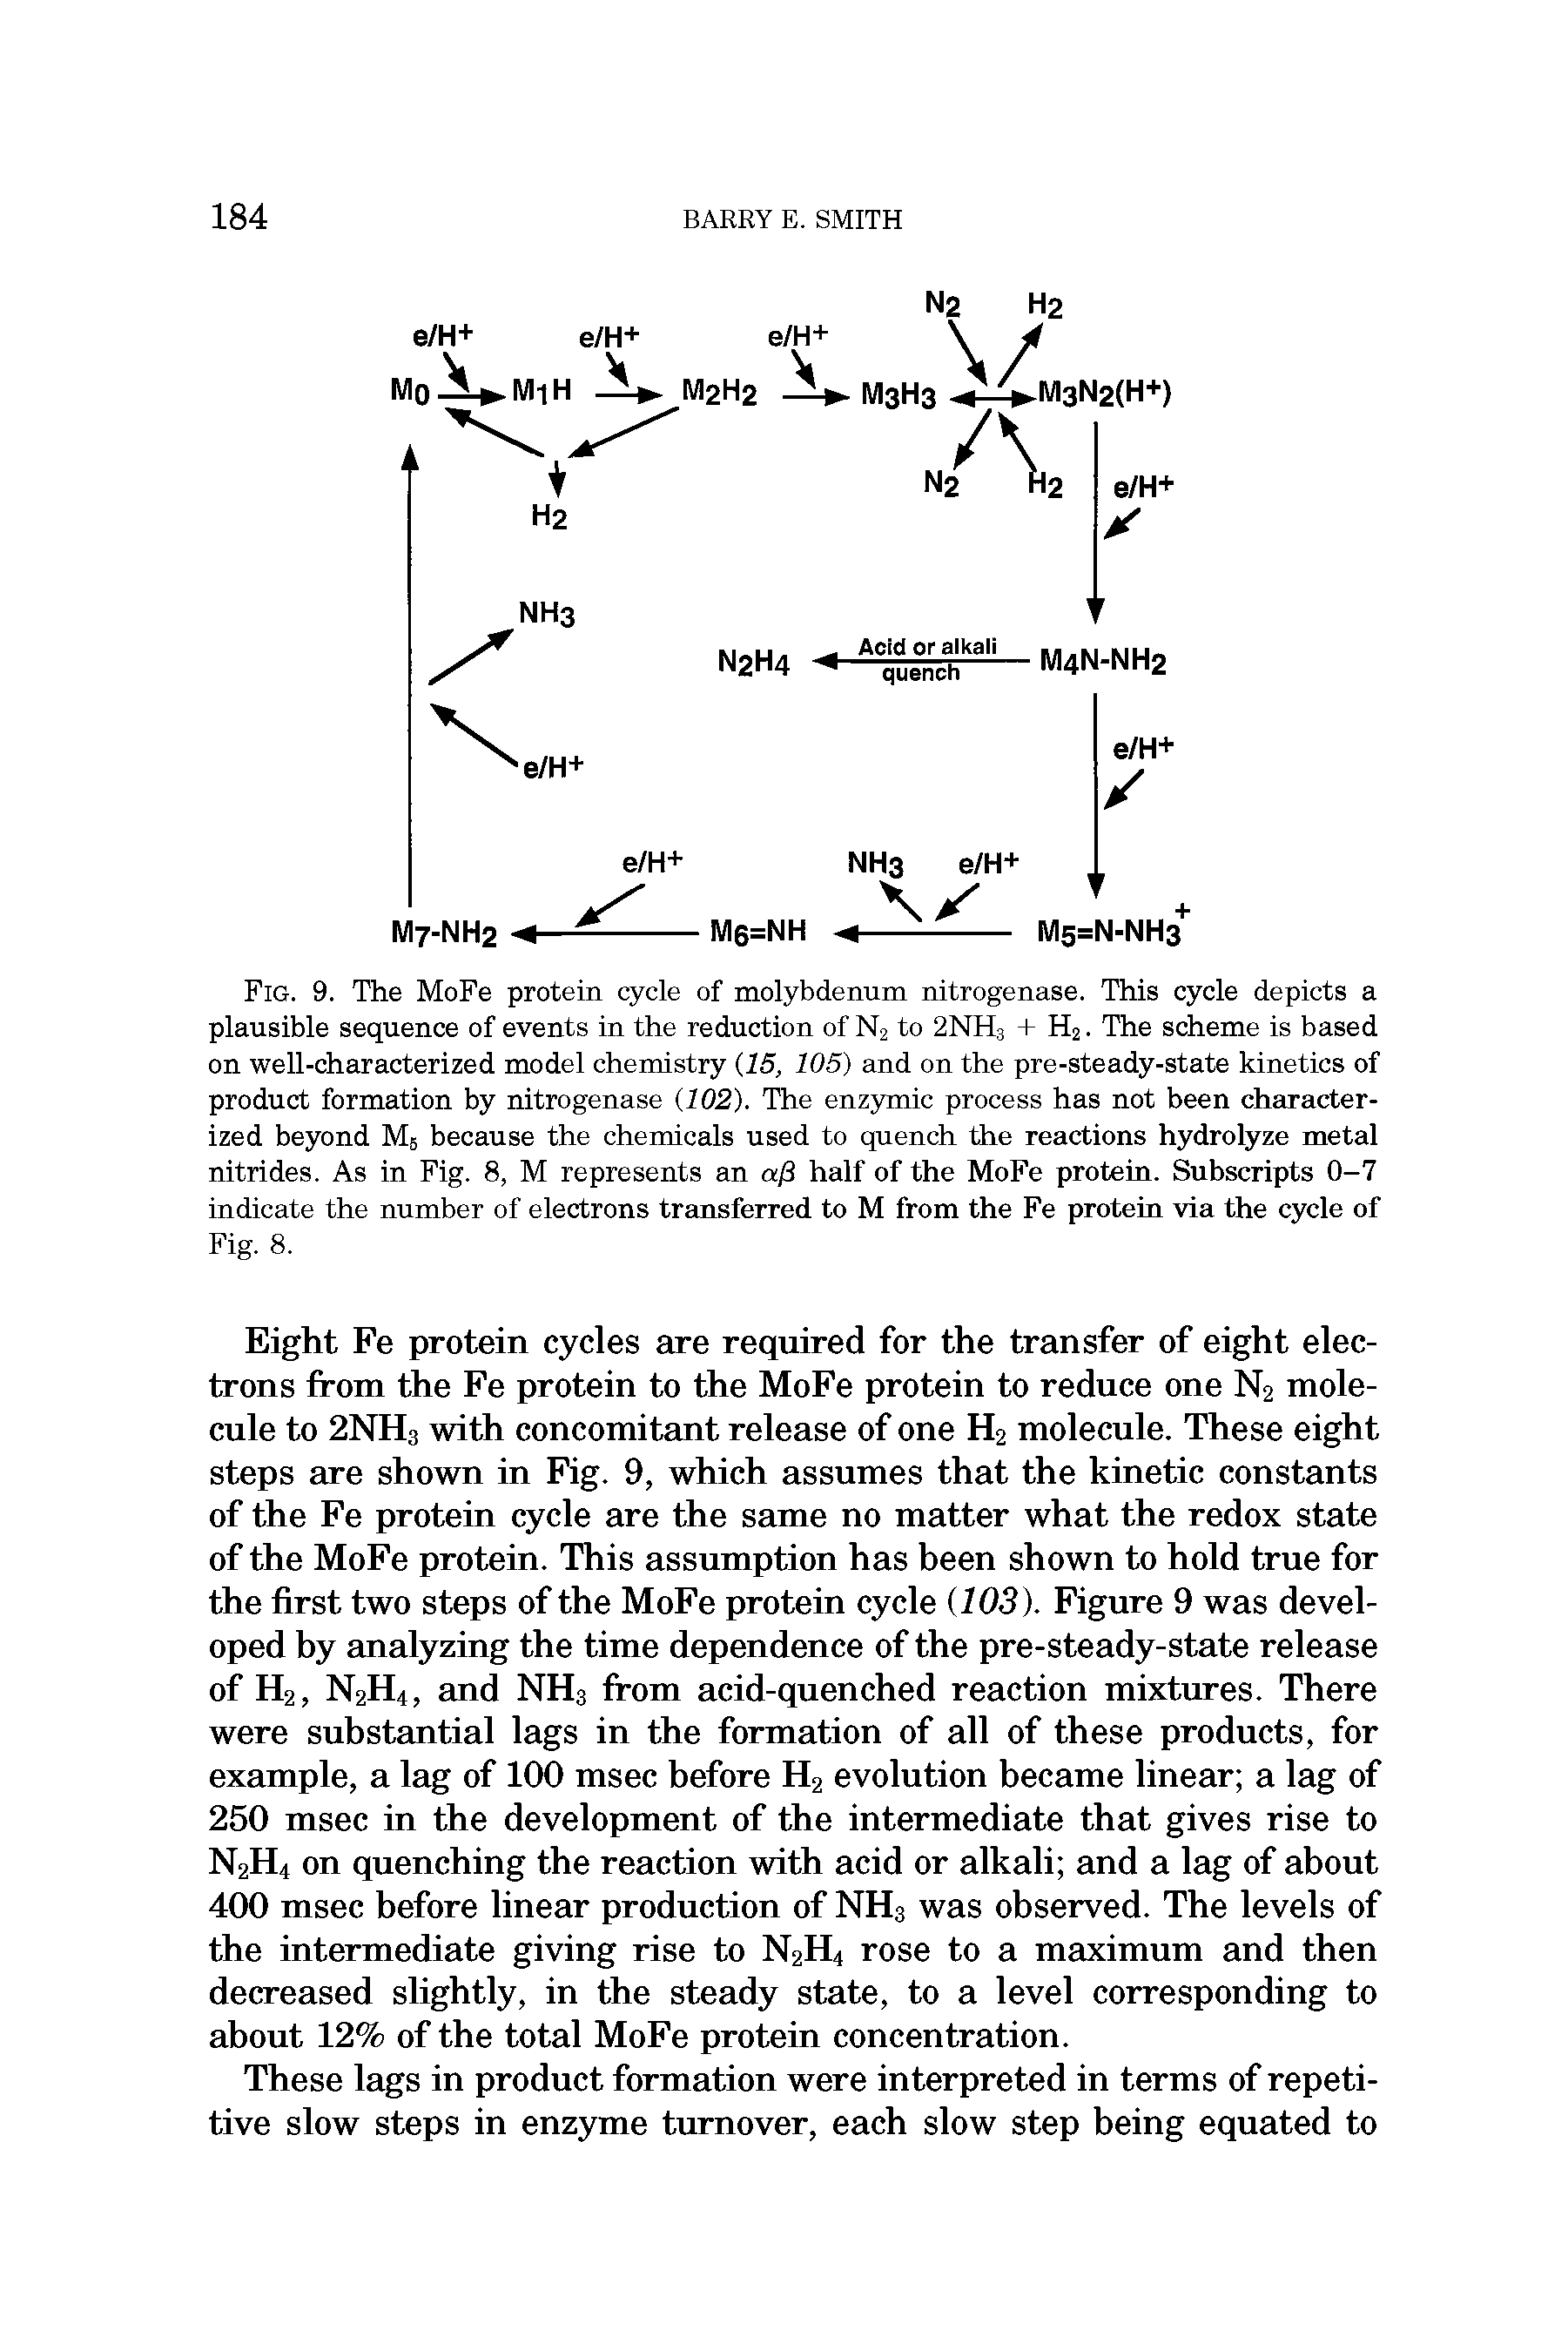 Fig. 9. The MoFe protein cycle of molybdenum nitrogenase. This cycle depicts a plausible sequence of events in the reduction of N2 to 2NH3 + H2. The scheme is based on well-characterized model chemistry (15, 105) and on the pre-steady-state kinetics of product formation by nitrogenase (102). The enzymic process has not been chsiracter-ized beyond M5 because the chemicals used to quench the reactions hydrolyze metal nitrides. As in Fig. 8, M represents an aji half of the MoFe protein. Subscripts 0-7 indicate the number of electrons trsmsferred to M from the Fe protein via the cycle of Fig. 8.